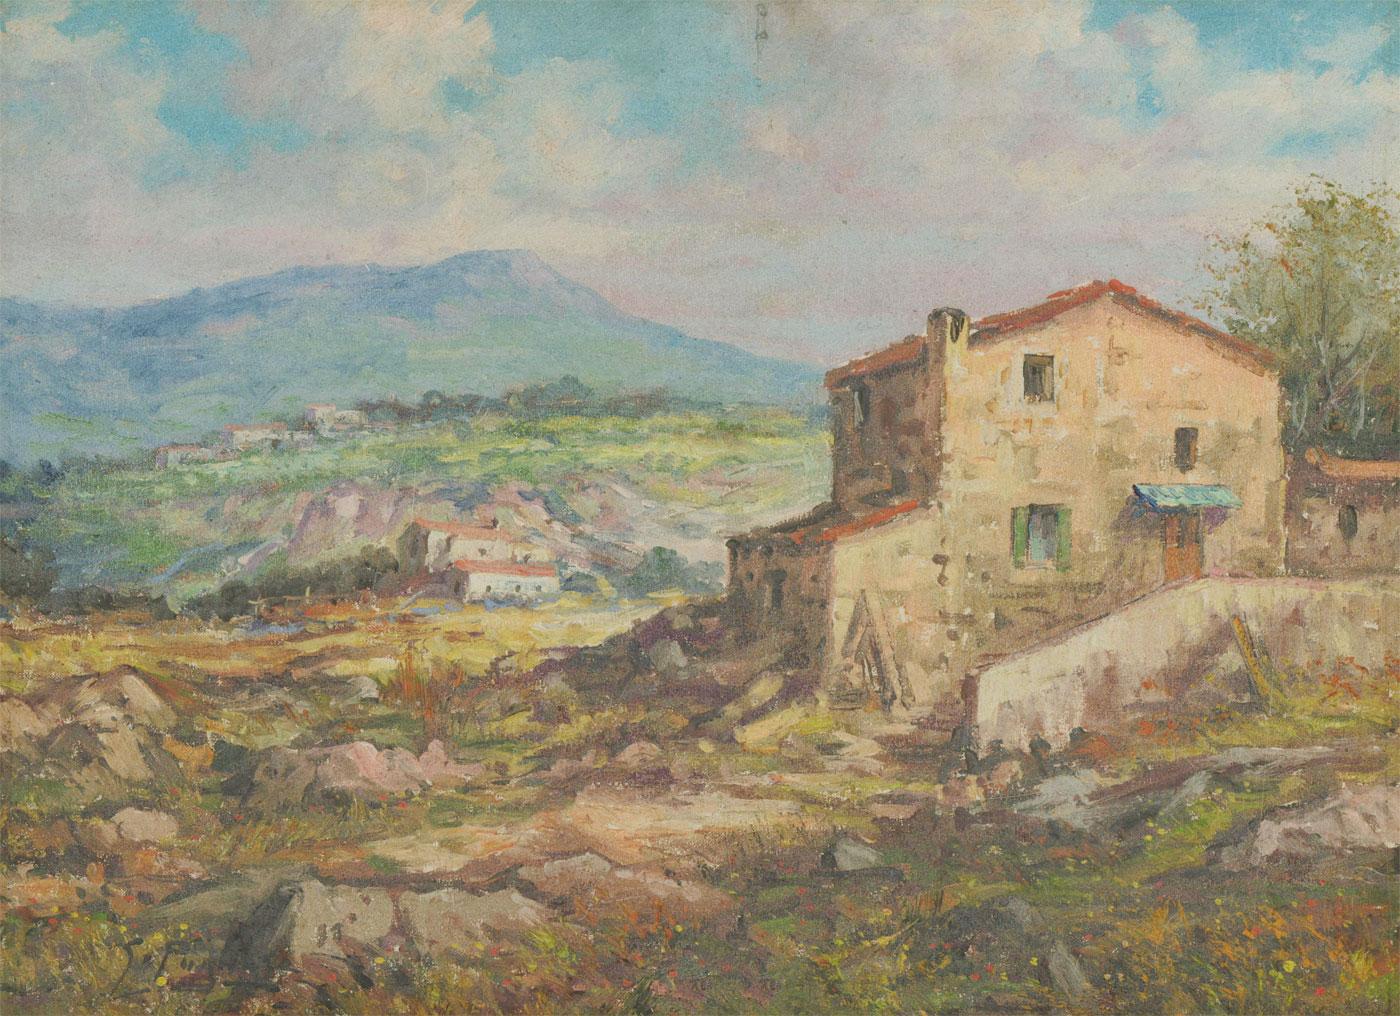 A fine oil painting by G. Pugliese, depicting a sunny continental landscape with scattered rural houses and mountains in the distance. Signed to the lower left-hand corner. Well-presented in a white slip with gilt detail and in a distressed golden